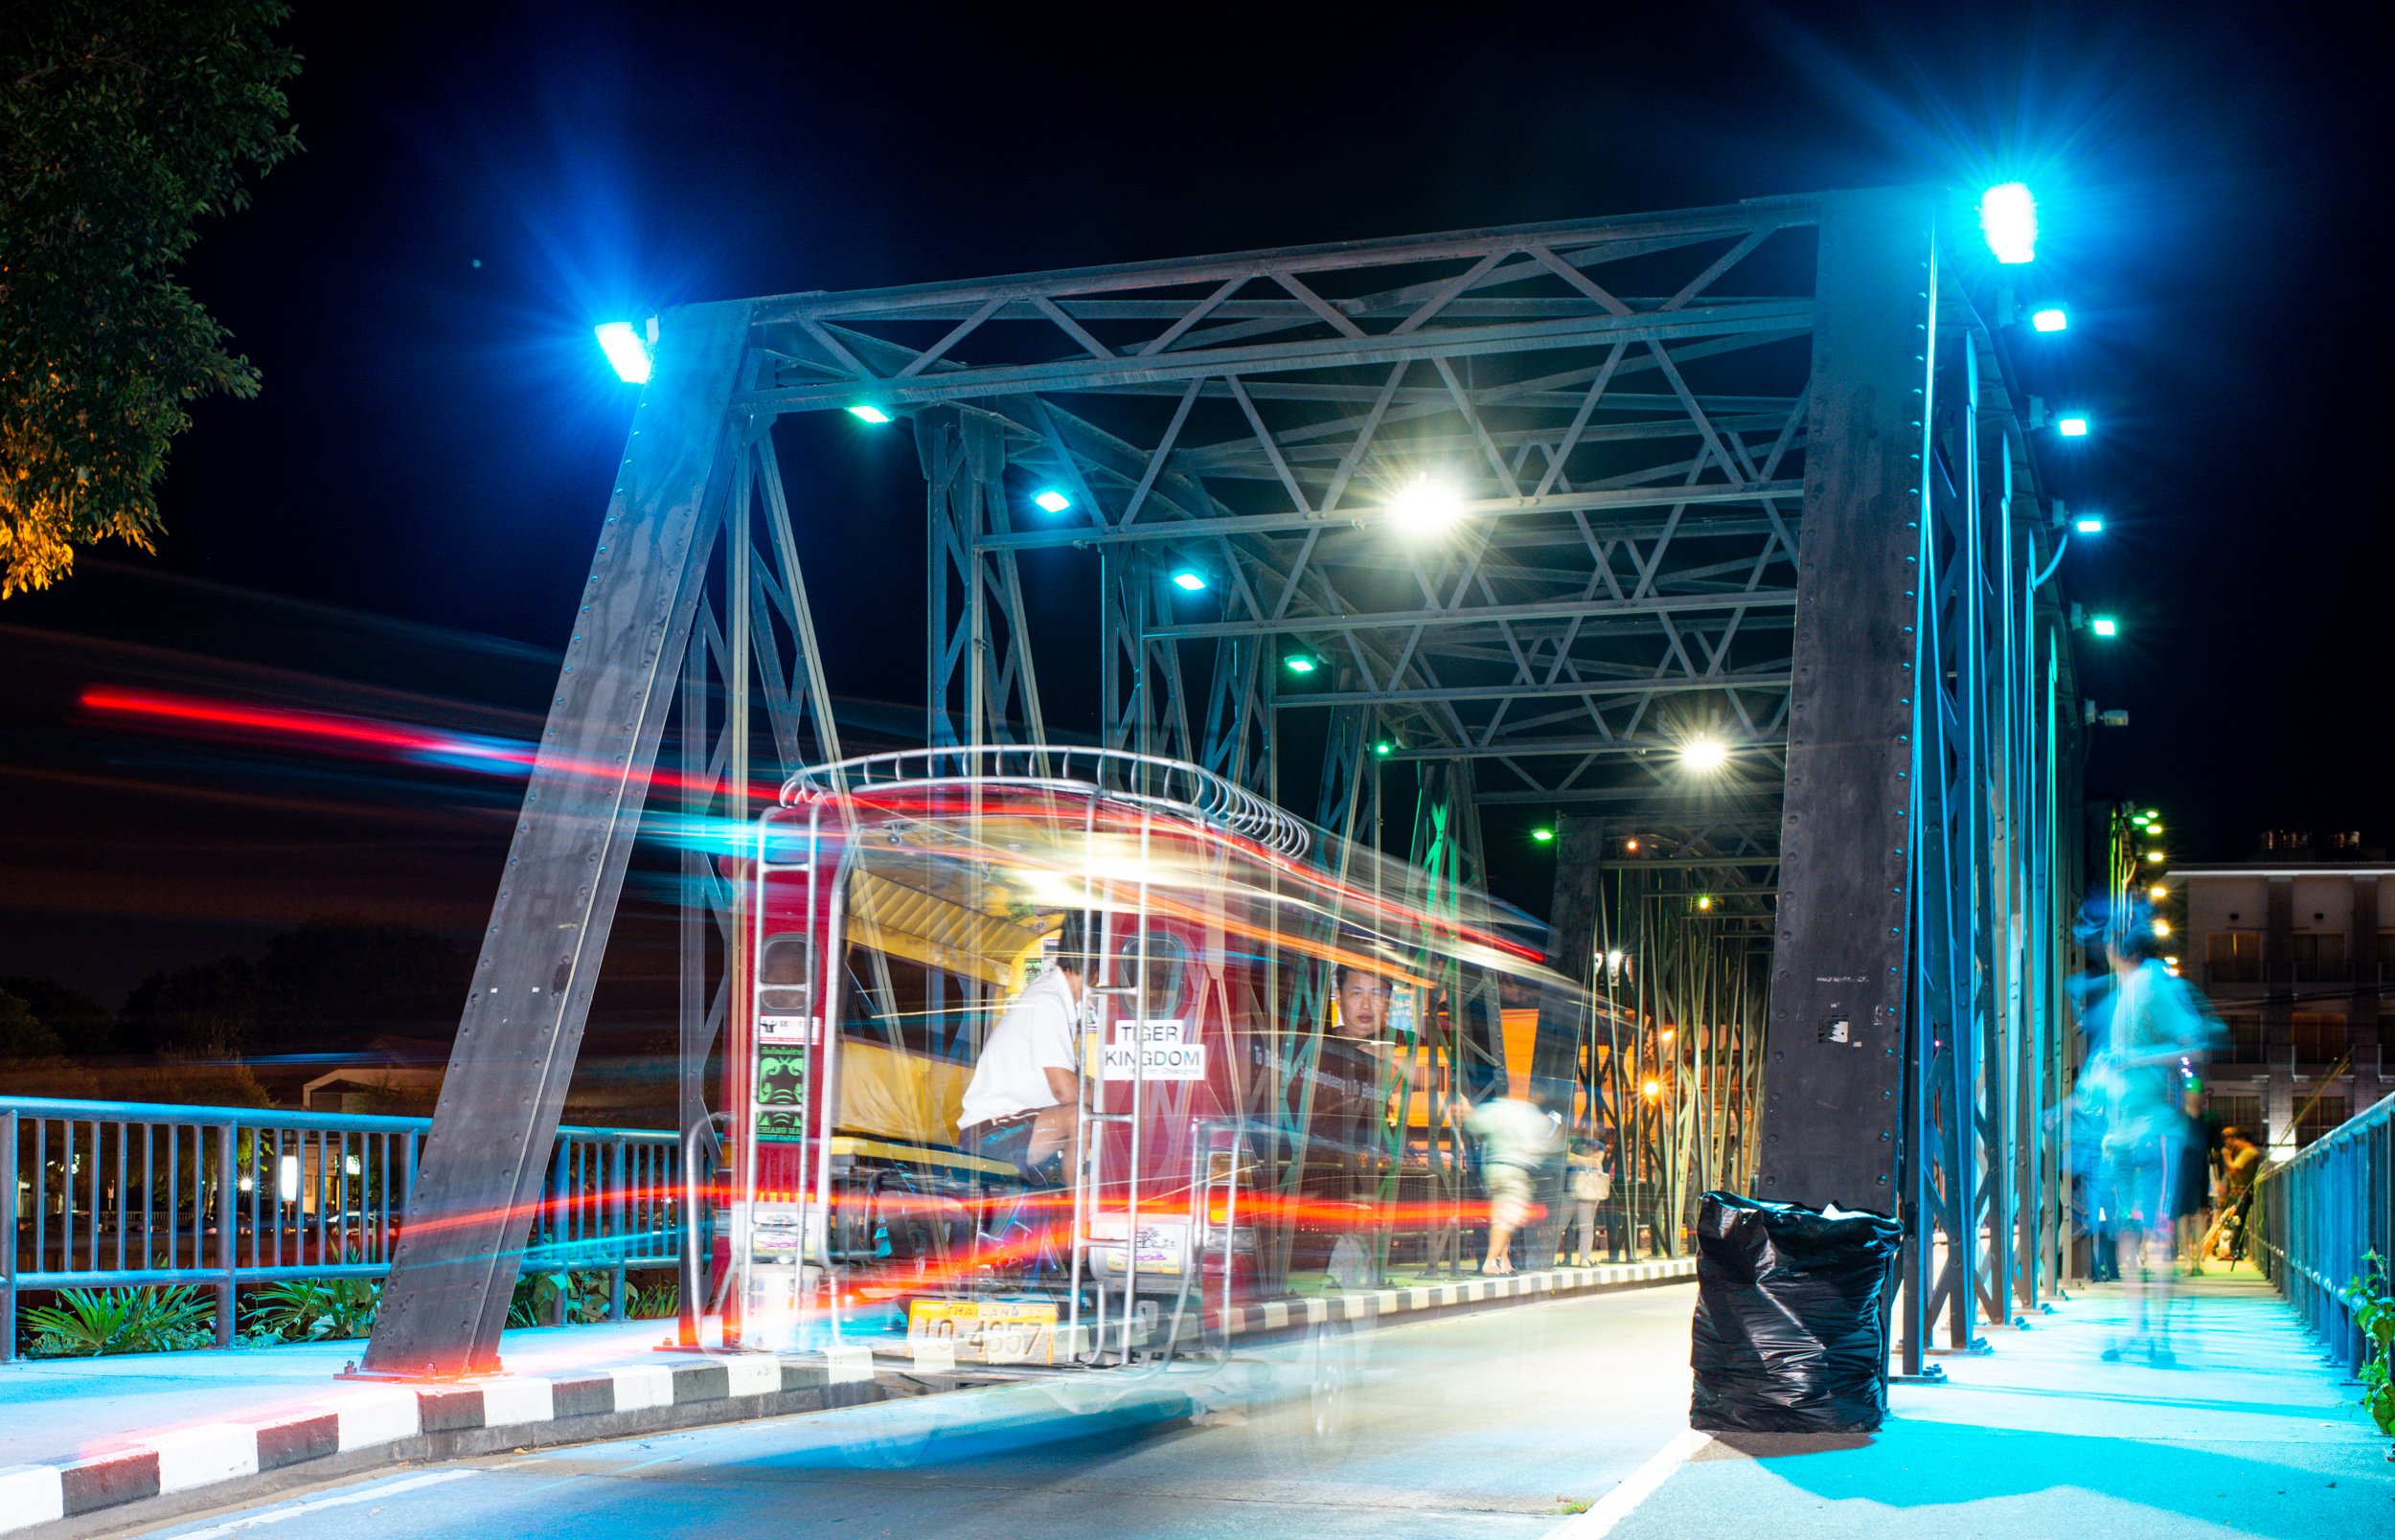 Vehicle crossing a bridge in Chiang Mai, Thailand, at night - for Photography Mentorship Program